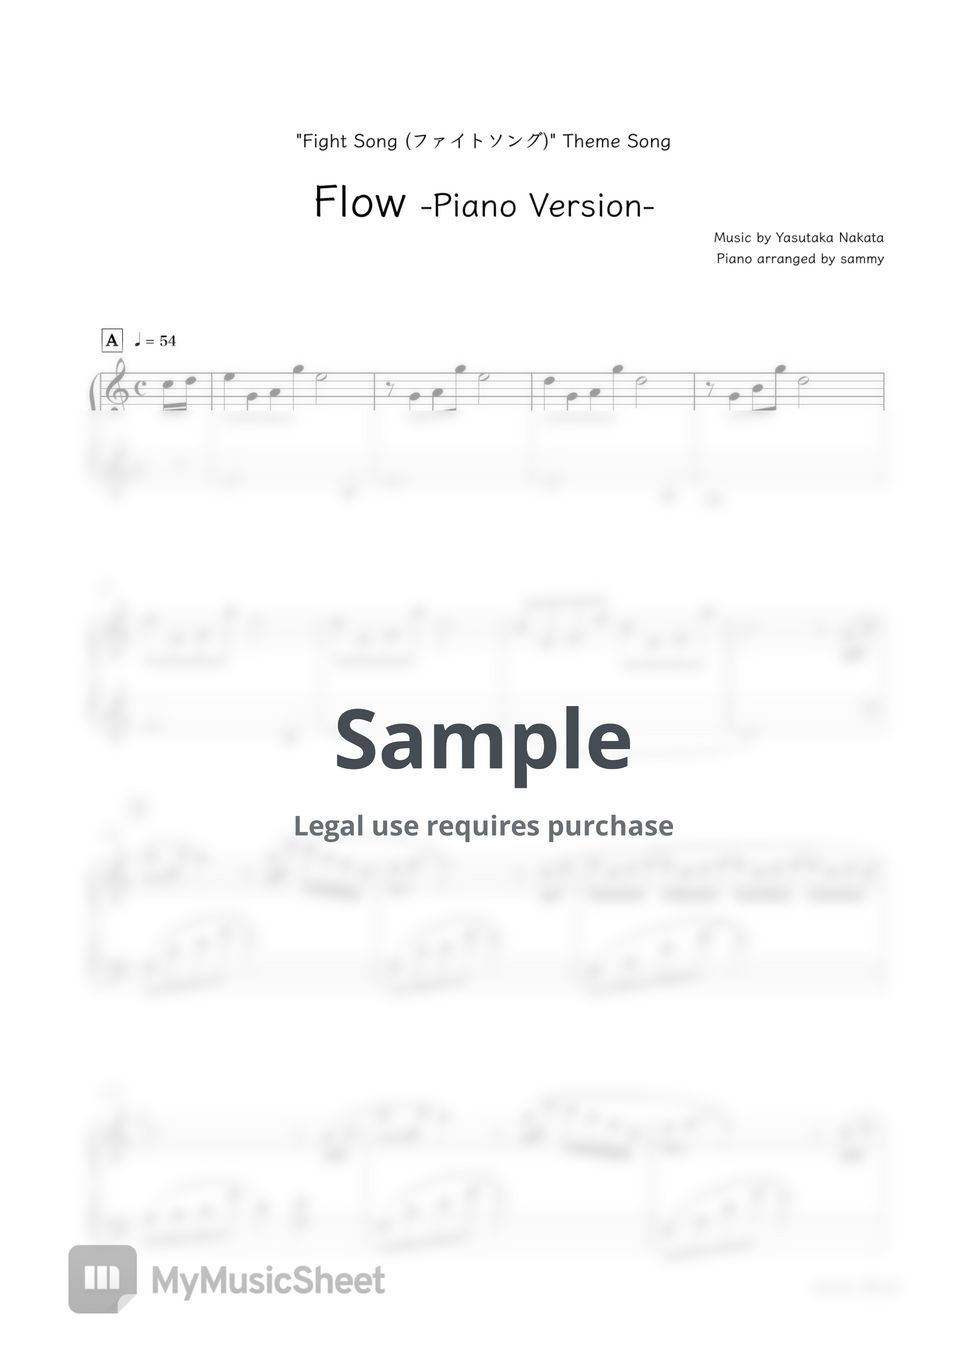 by "Fight Song(ファイトソング)" - Flow -Piano Version- (Perfume) by sammy